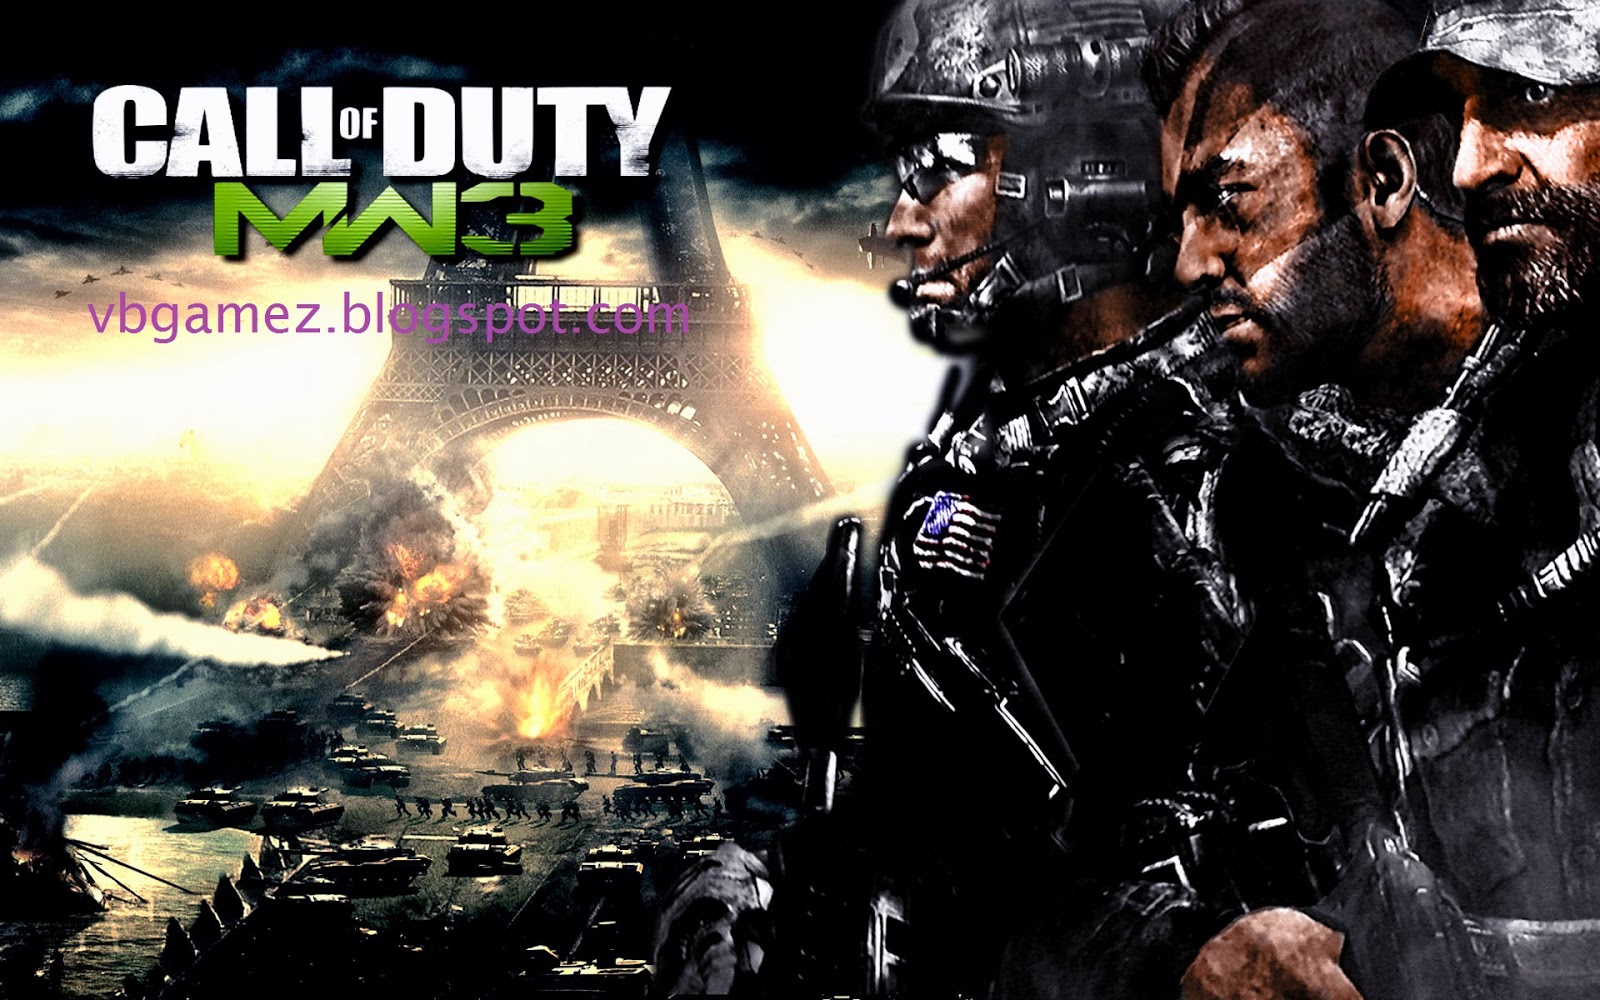 call-of-duty-modern-warfare-3-highly-compressed-vbgamez